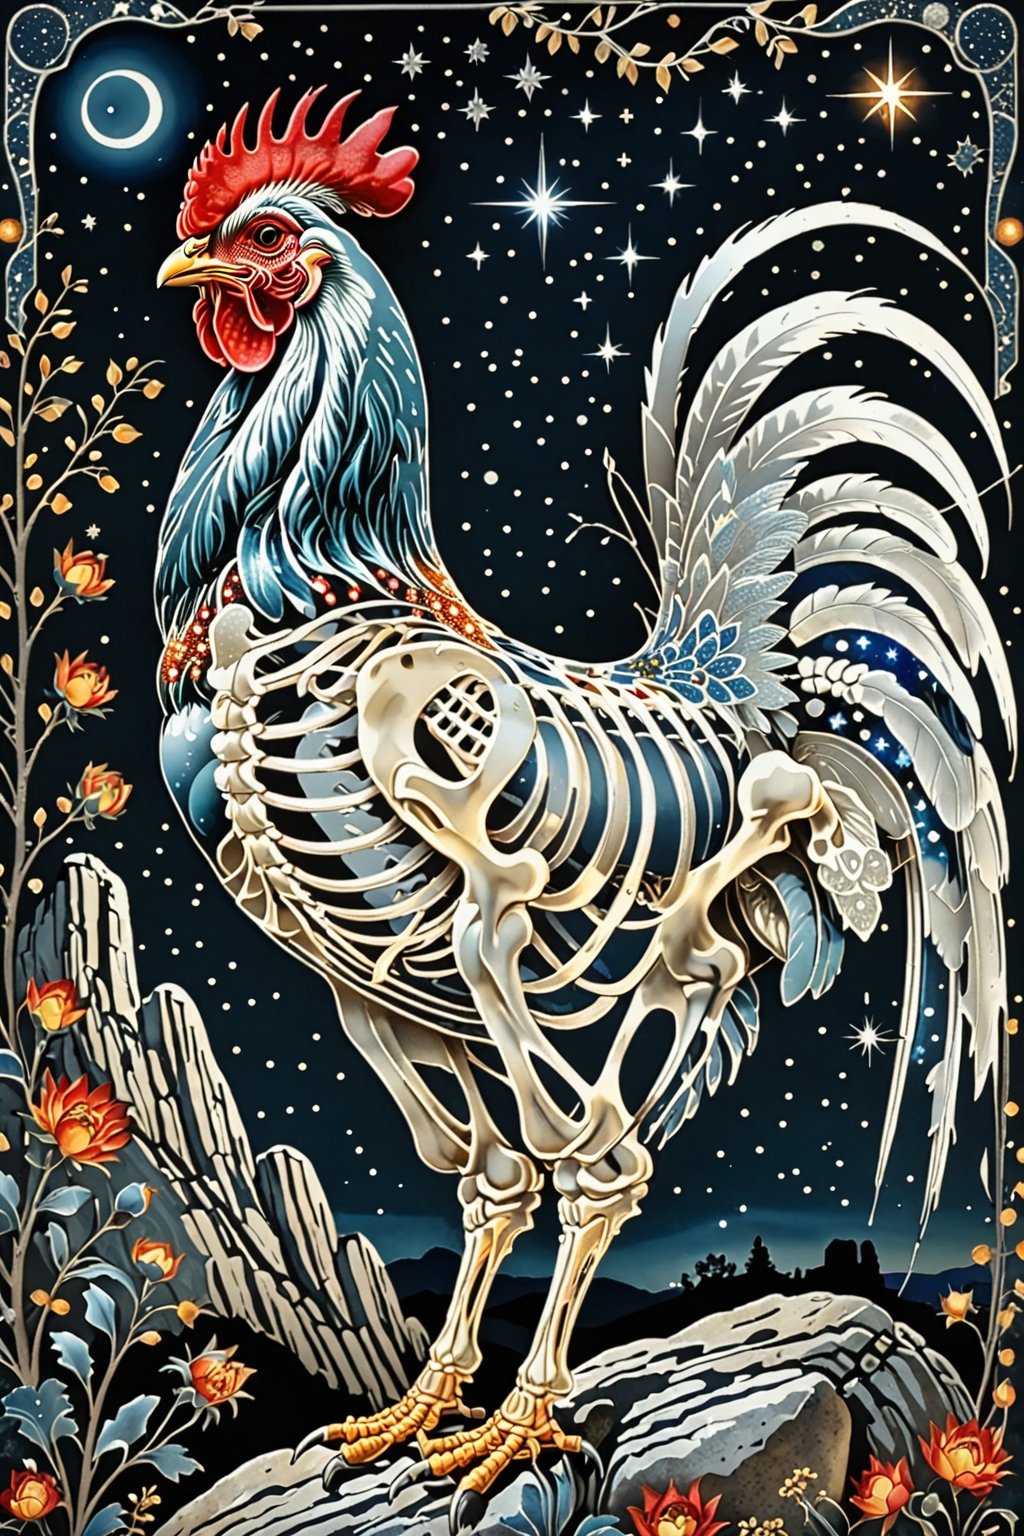 A majestic rooster with intricate silver metal patterns adorning his skeletal structure. Climbing rocks in the country backdrop, surrounded by stars and constellations, illustrations, beautiful. The color palette is dominated by dark blua, silver, black and white, with the skeleton shining, being the most prominent feature, contrasting beautifully with the background elements.